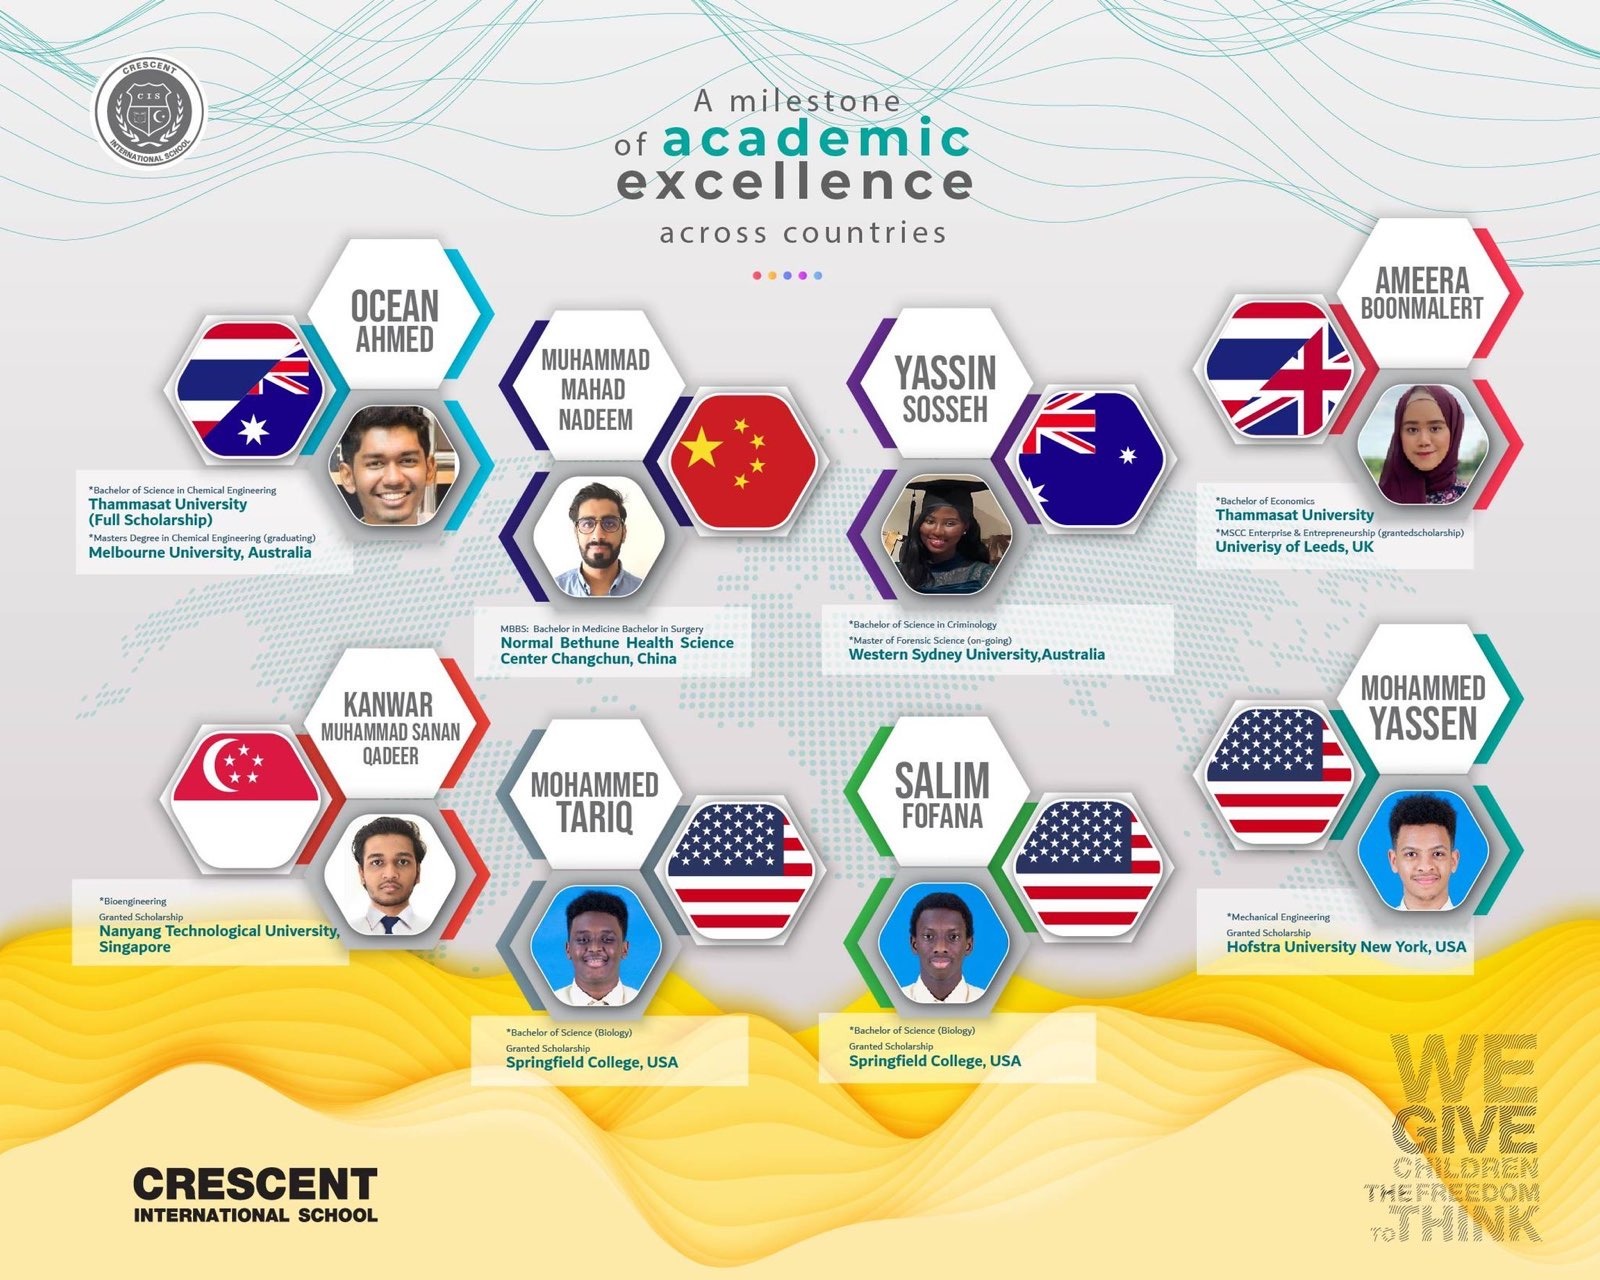 Crescent International School - Milestone of Academic Excellence Across Multiple Countries.